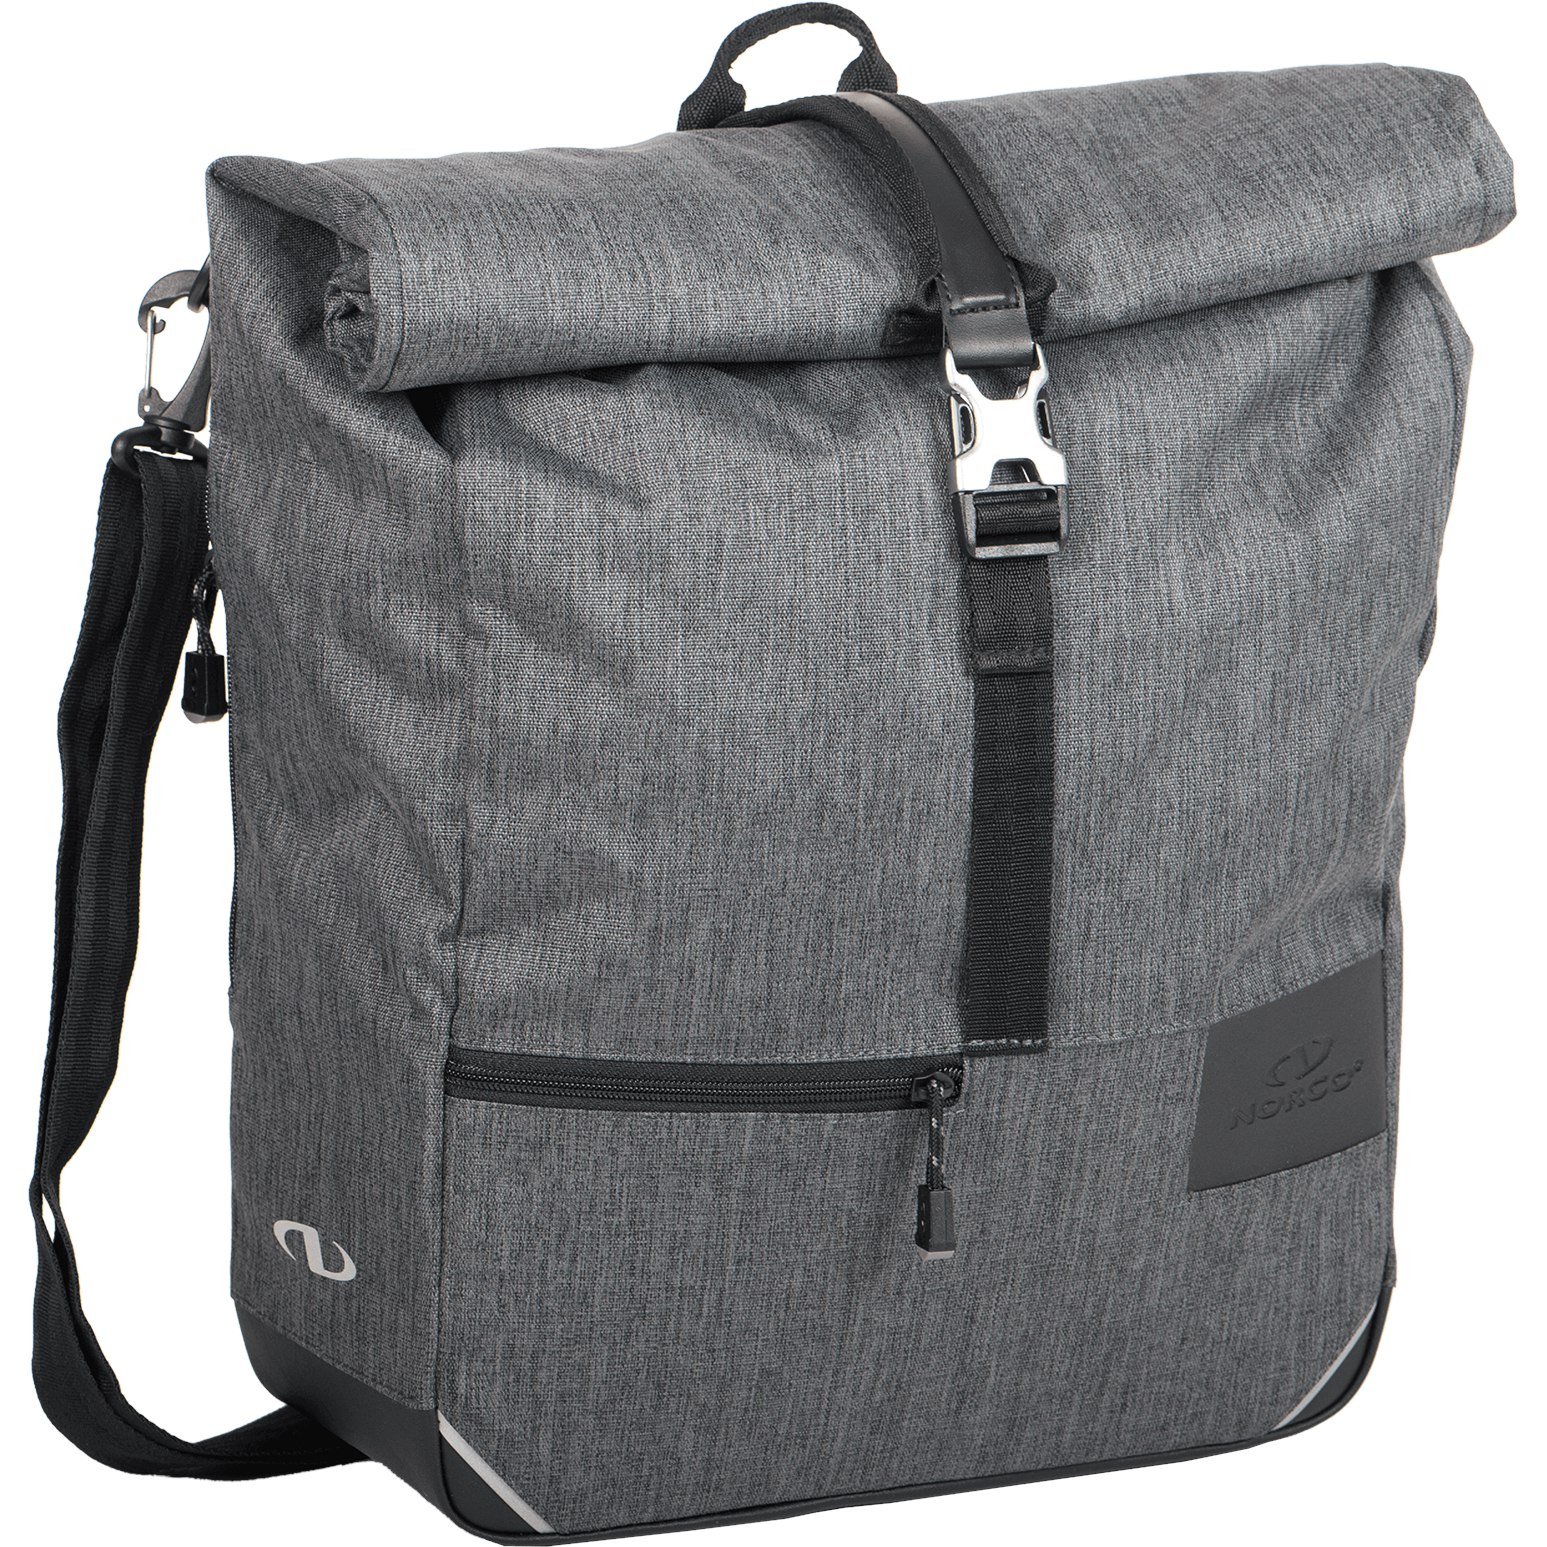 Picture of Norco Fintry City Bag 0224UB - tweed grey